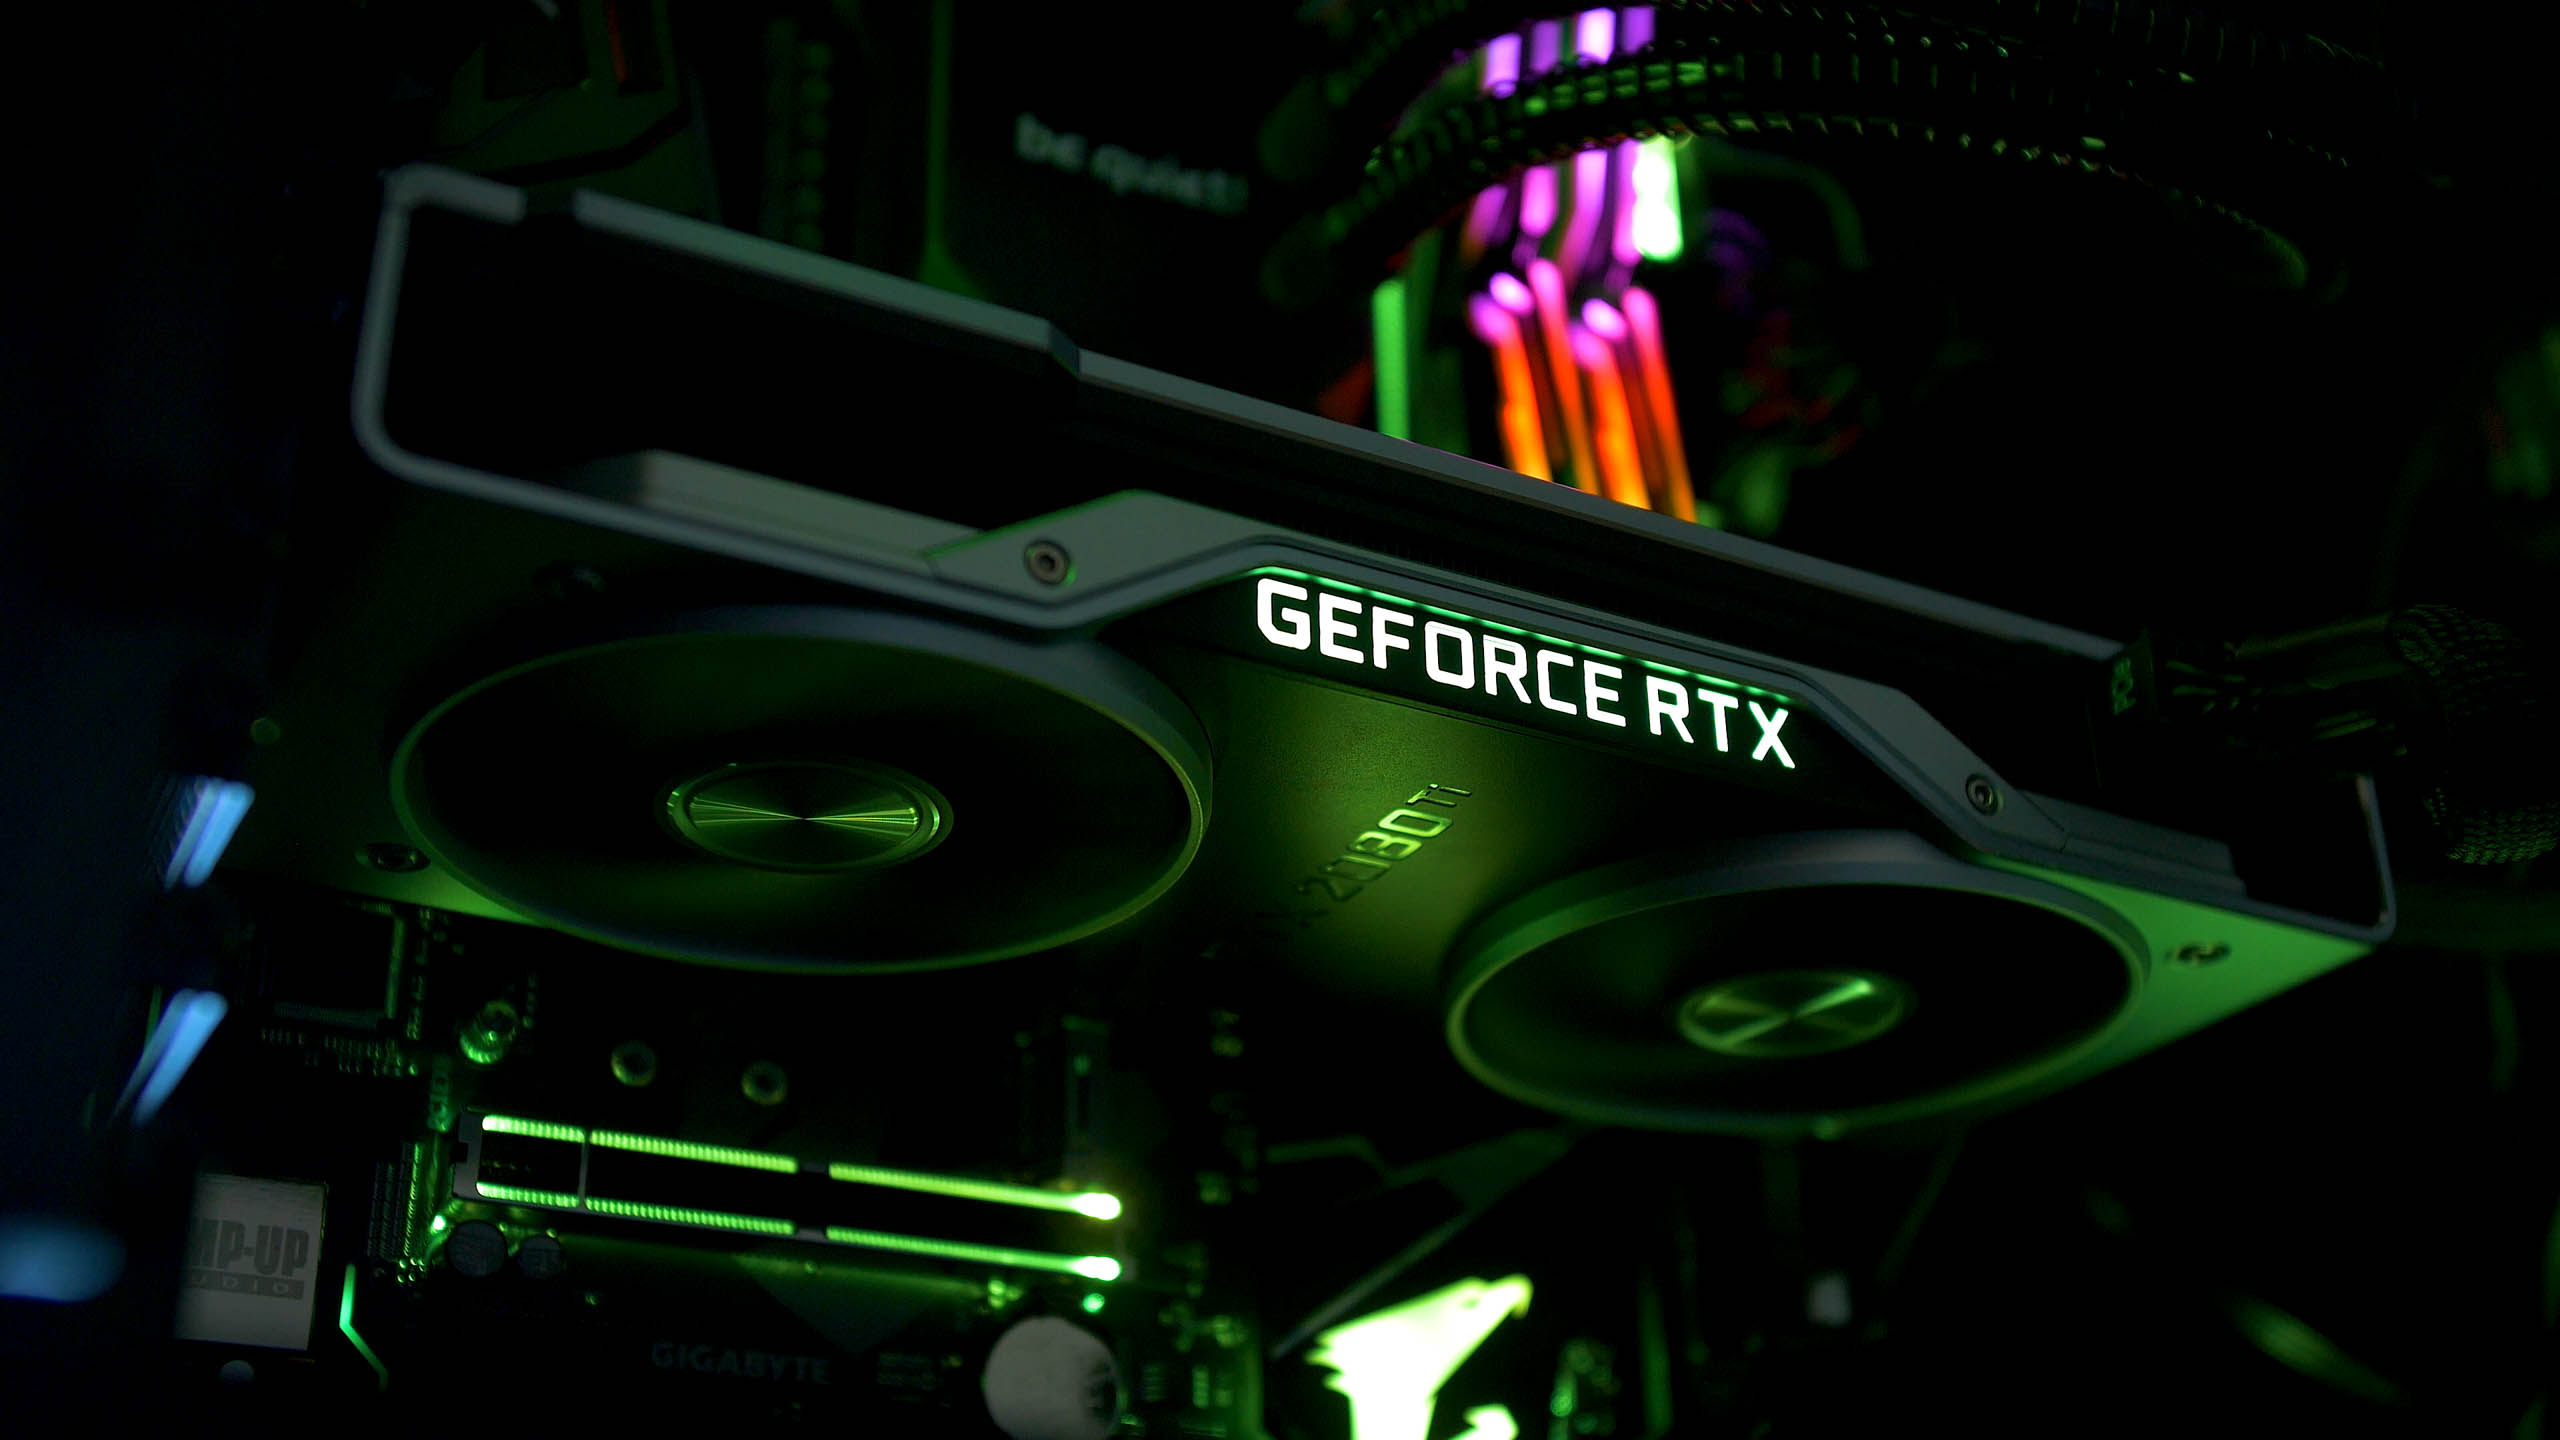 Leaked Nvidia RTX 3090 benchmark score shows performance up to 26% faster than RTX 2080 Ti